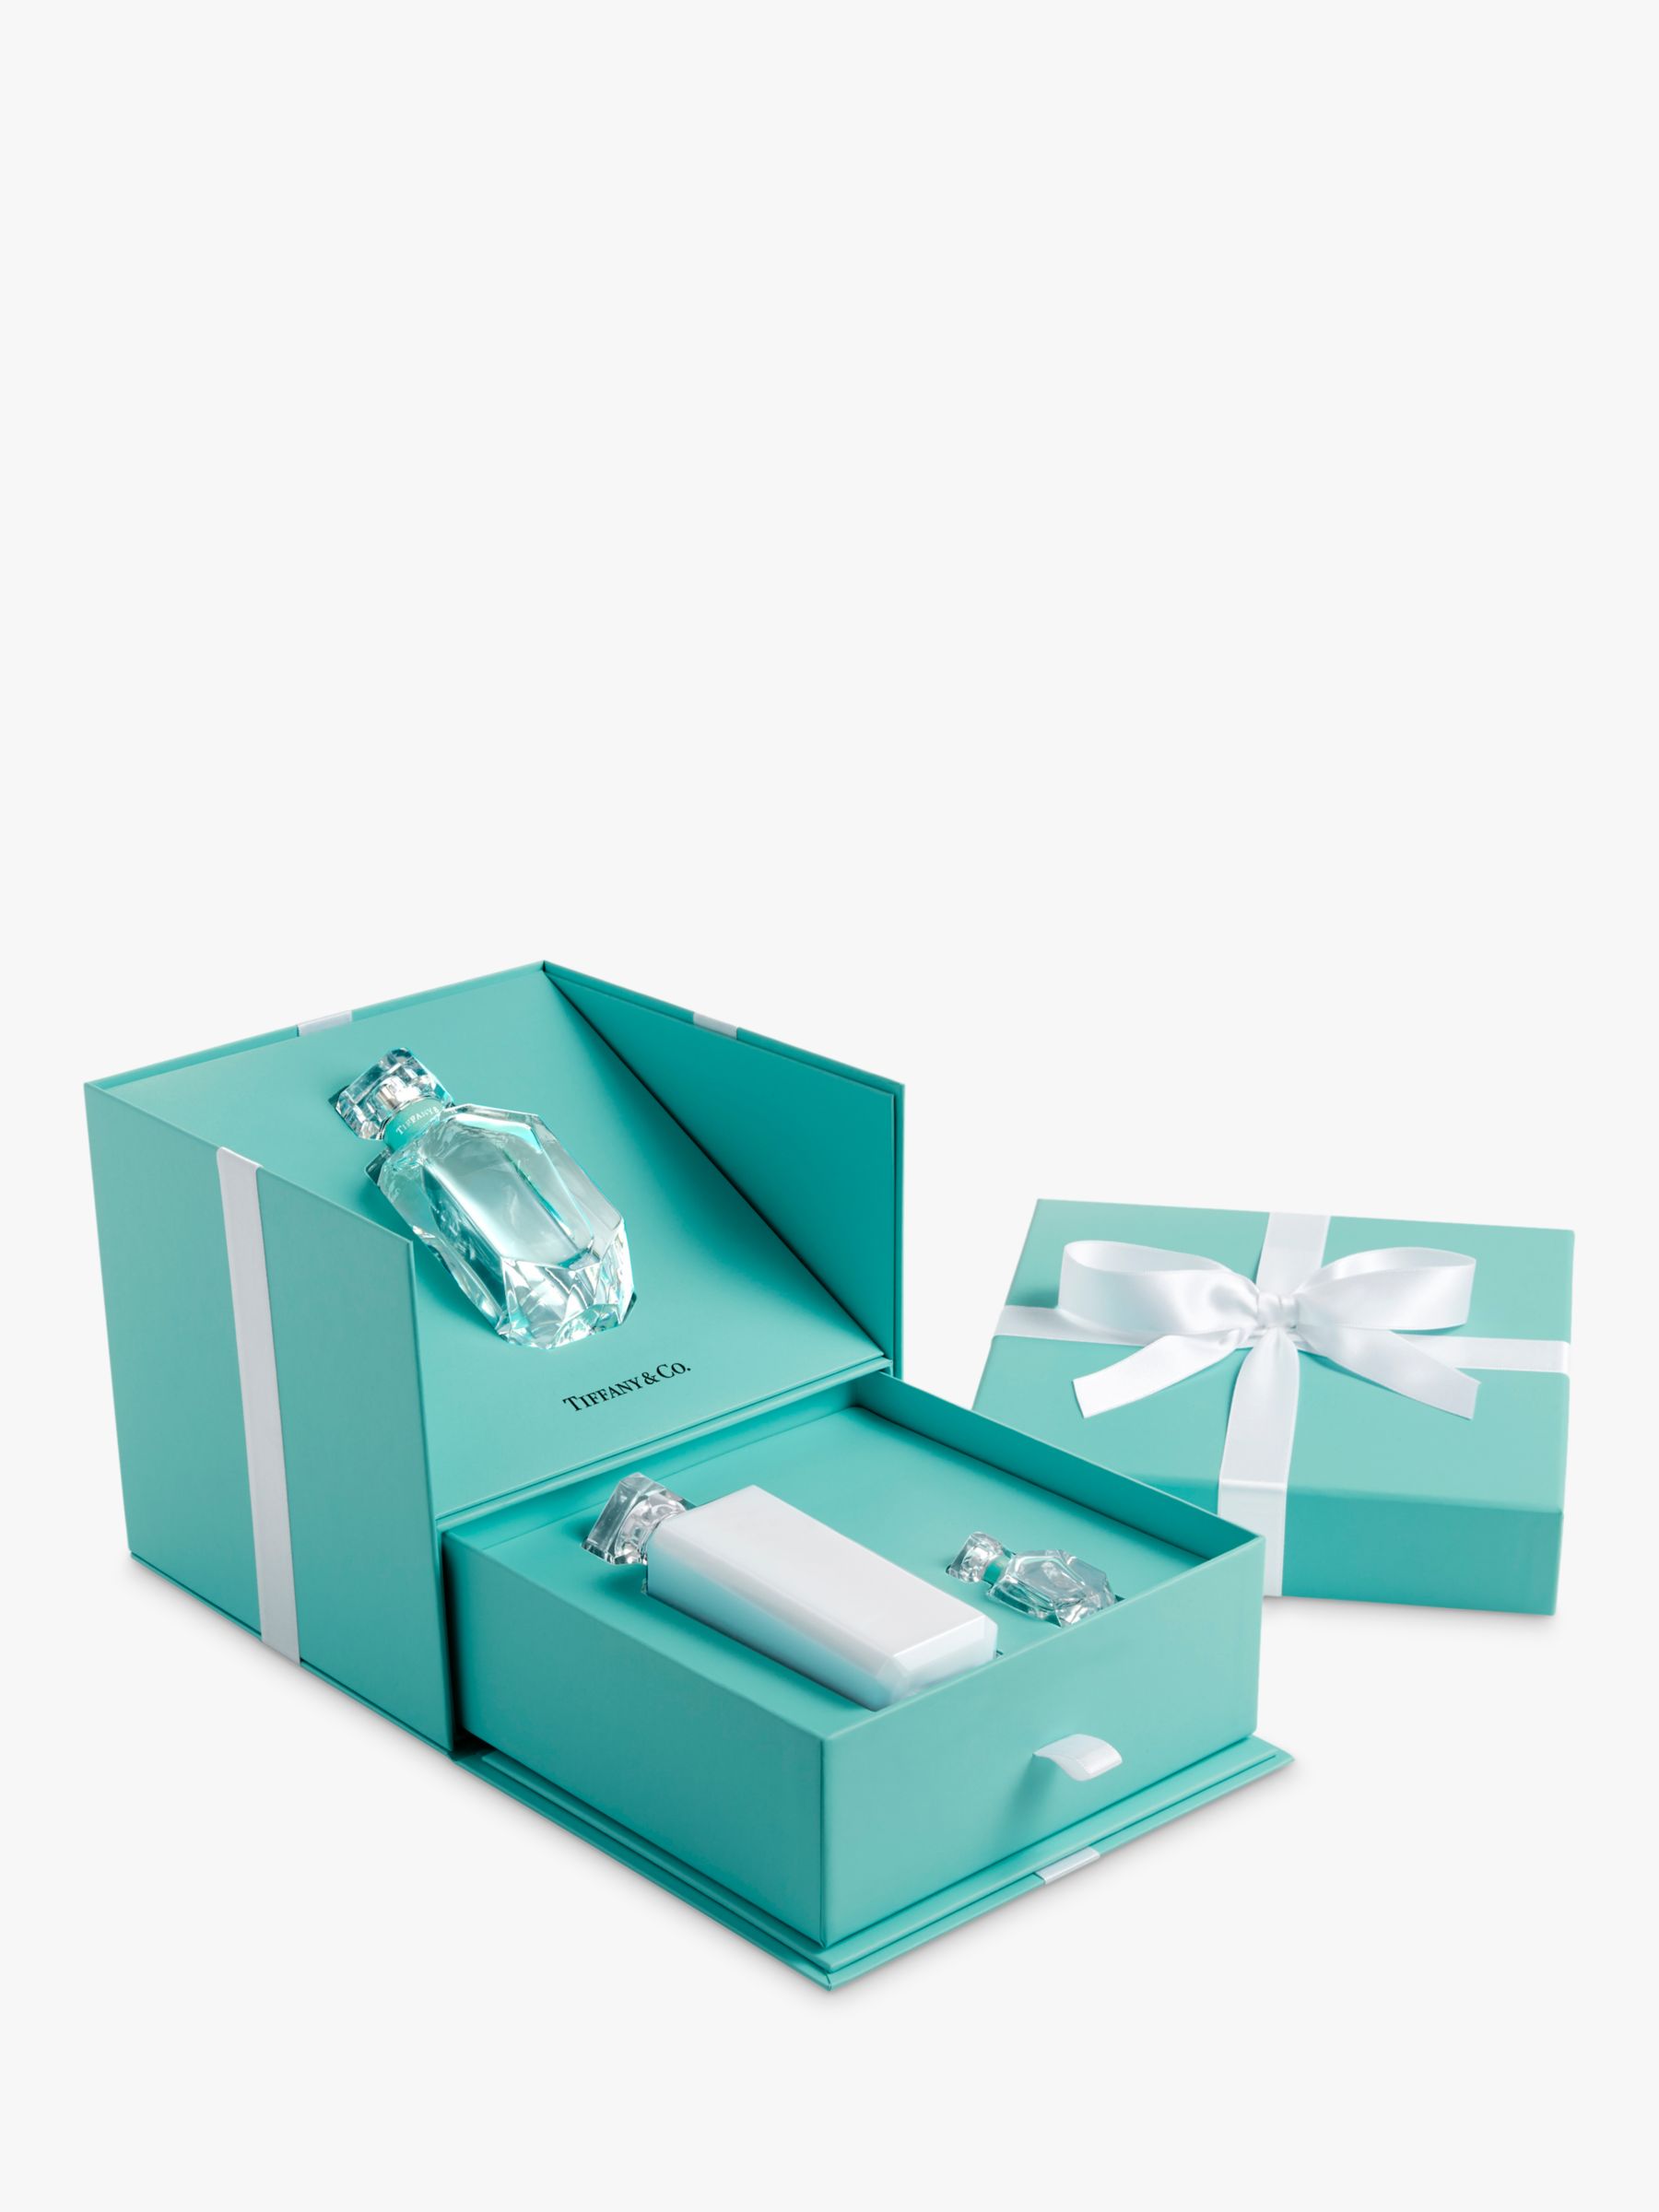 tiffany and co fragrance gift set